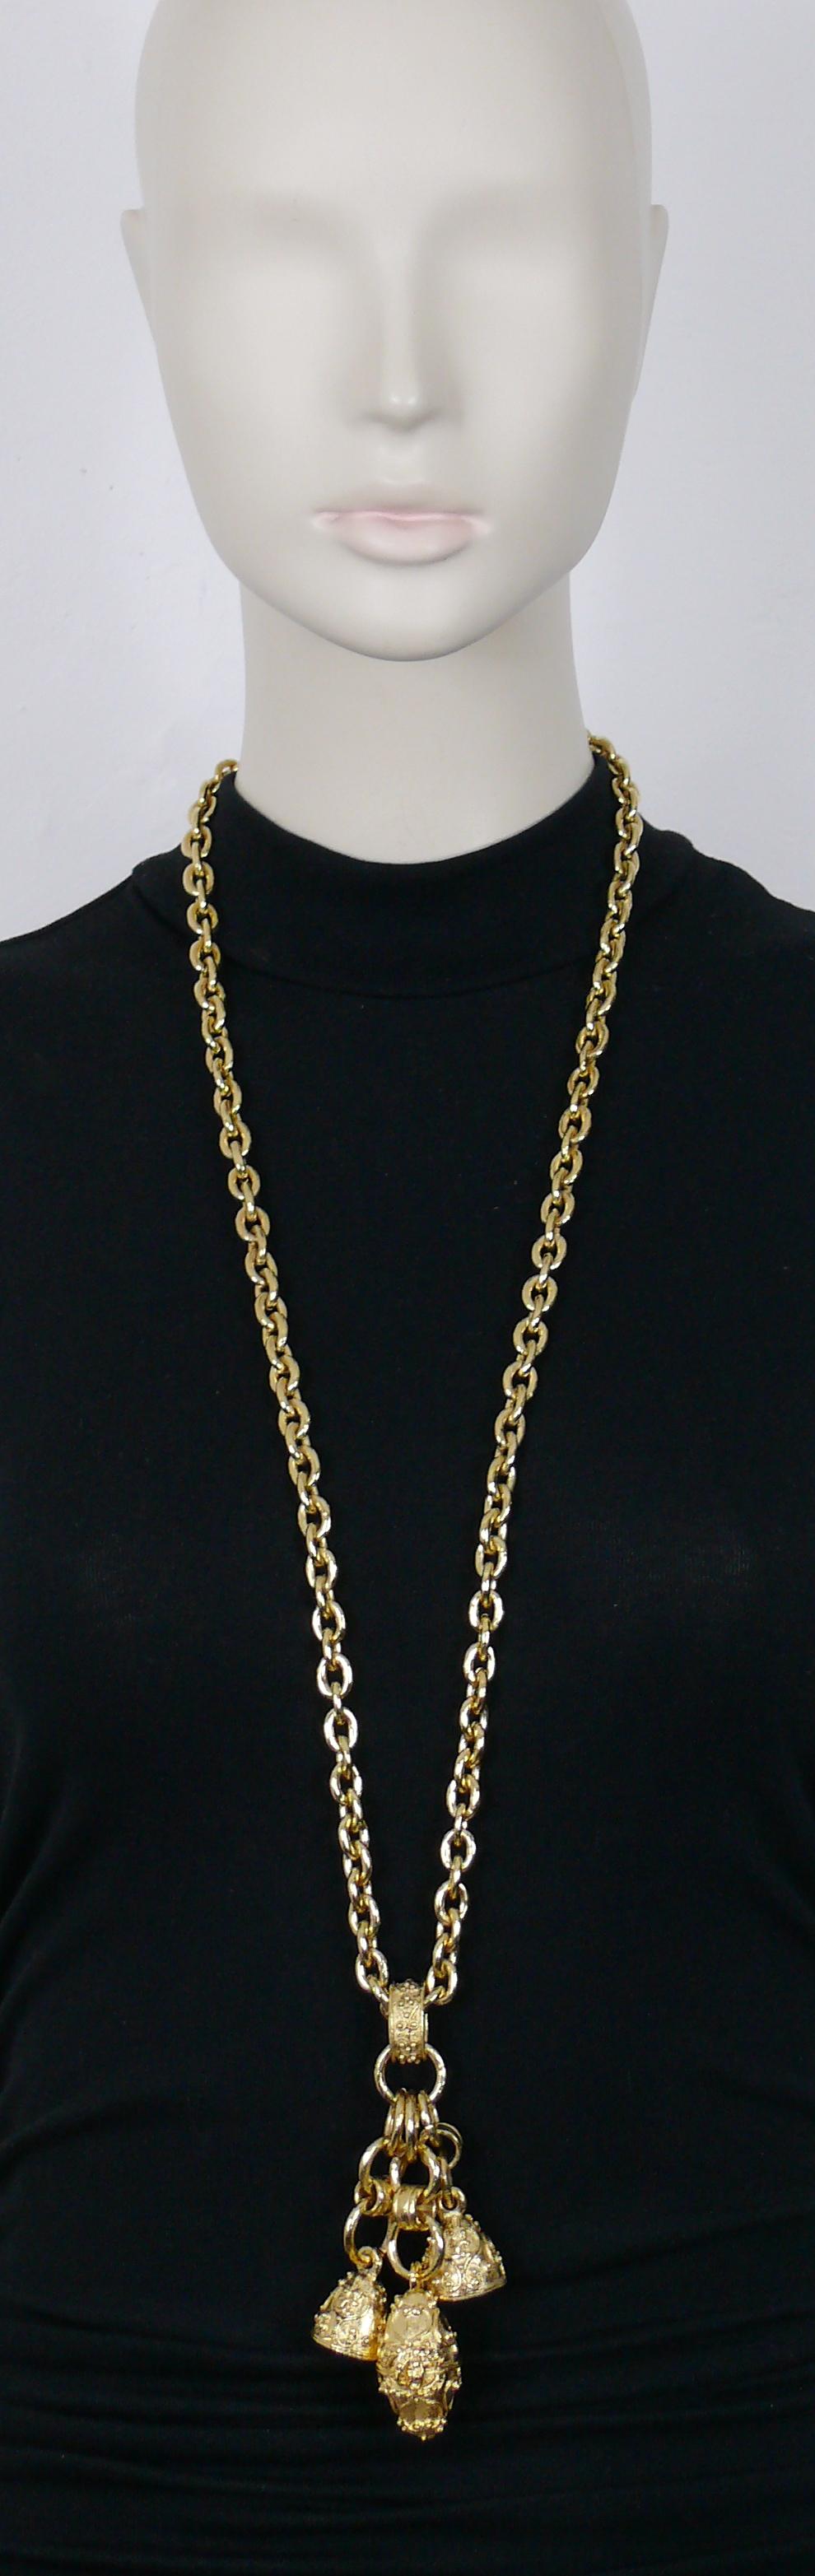 CHANEL vintage 1994 chunky gold toned chain necklace featuring a pendant with two bells (tinklings) and one 